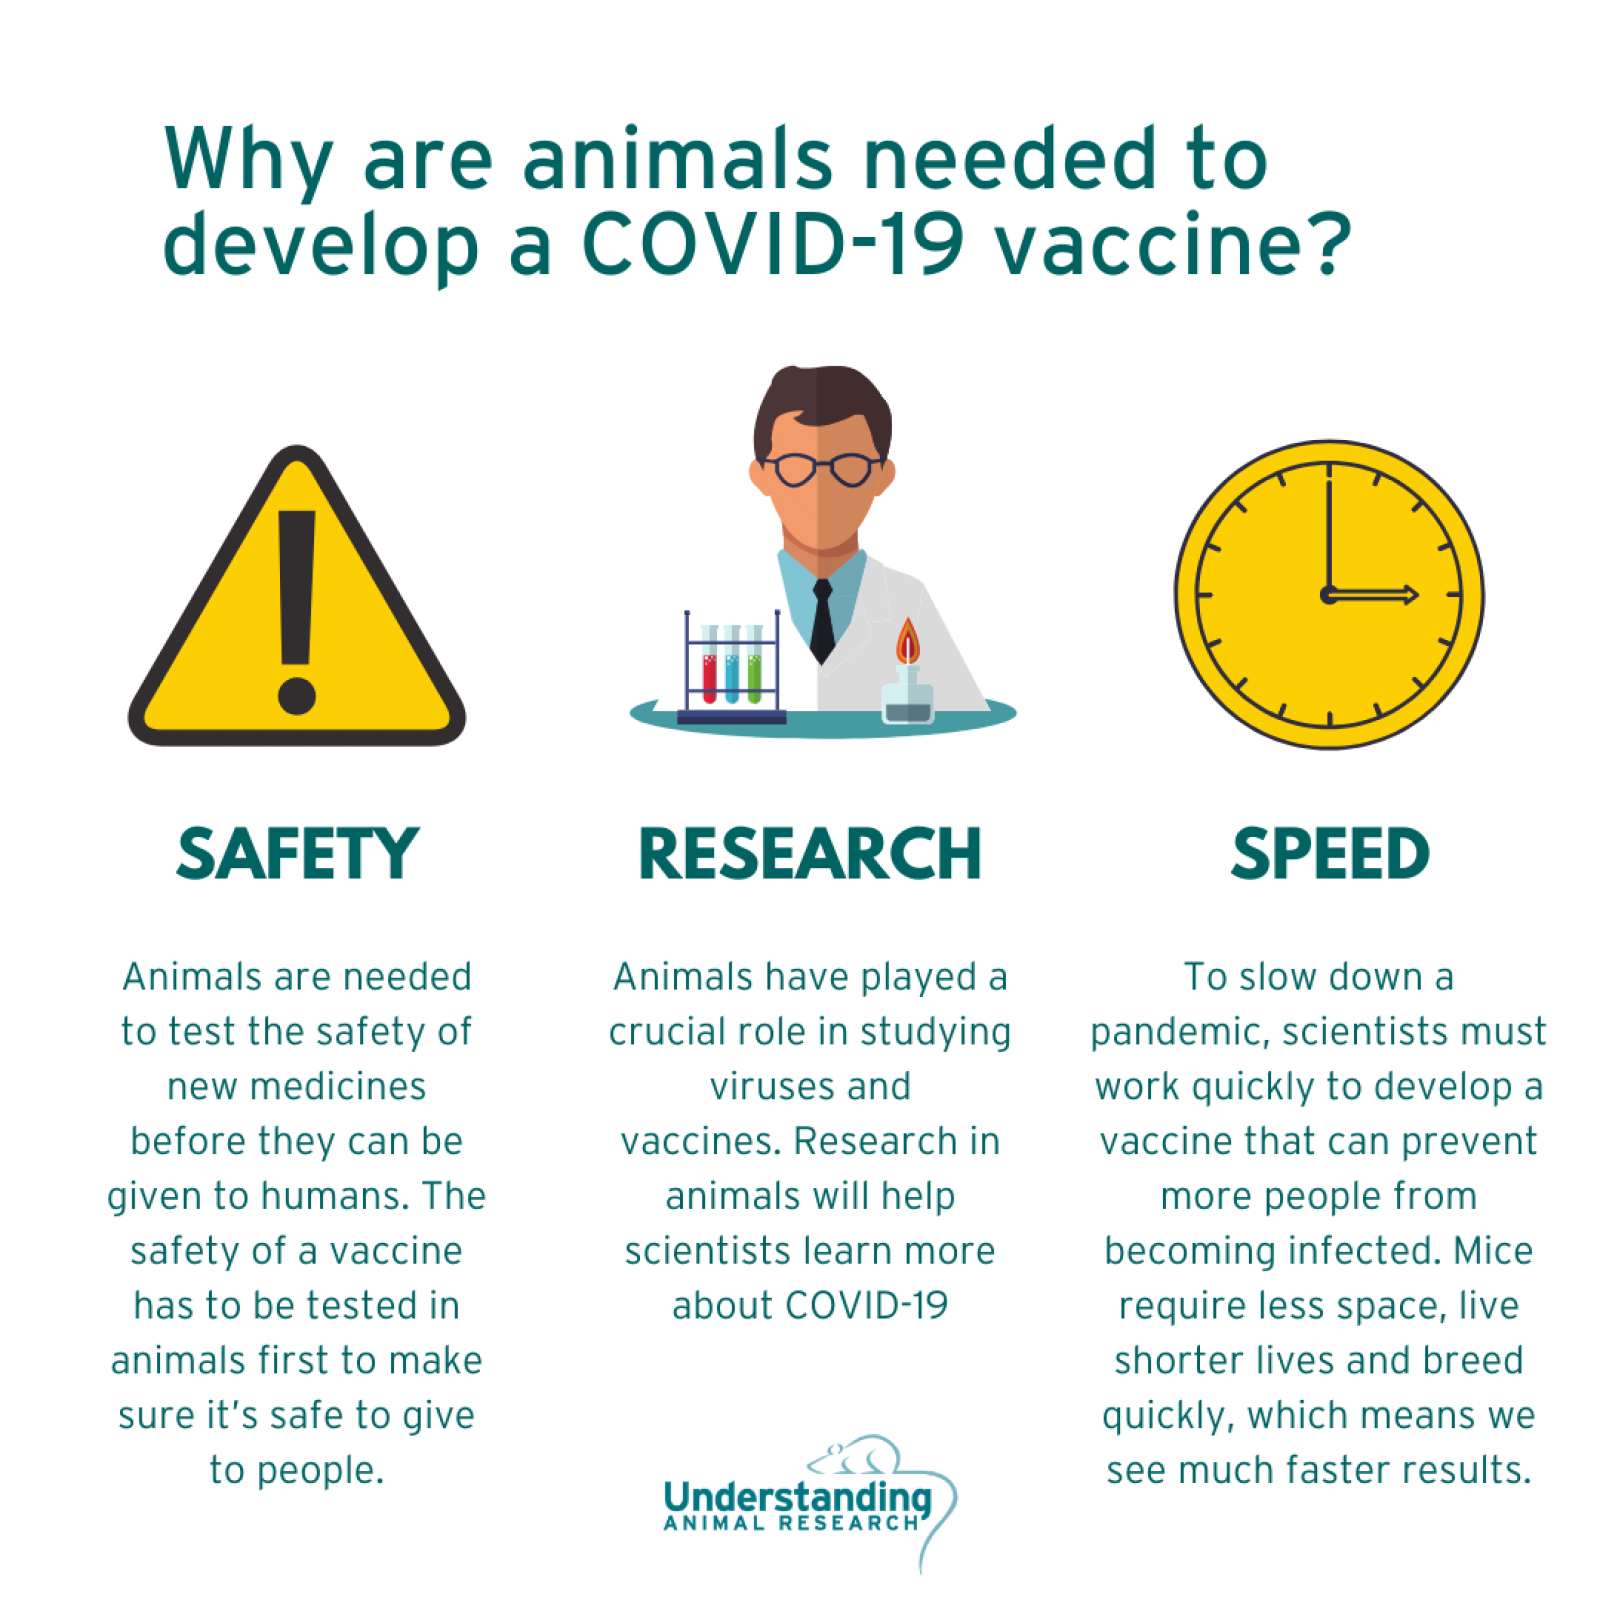 Why are animals needed to develop COVID-19 vaccines?